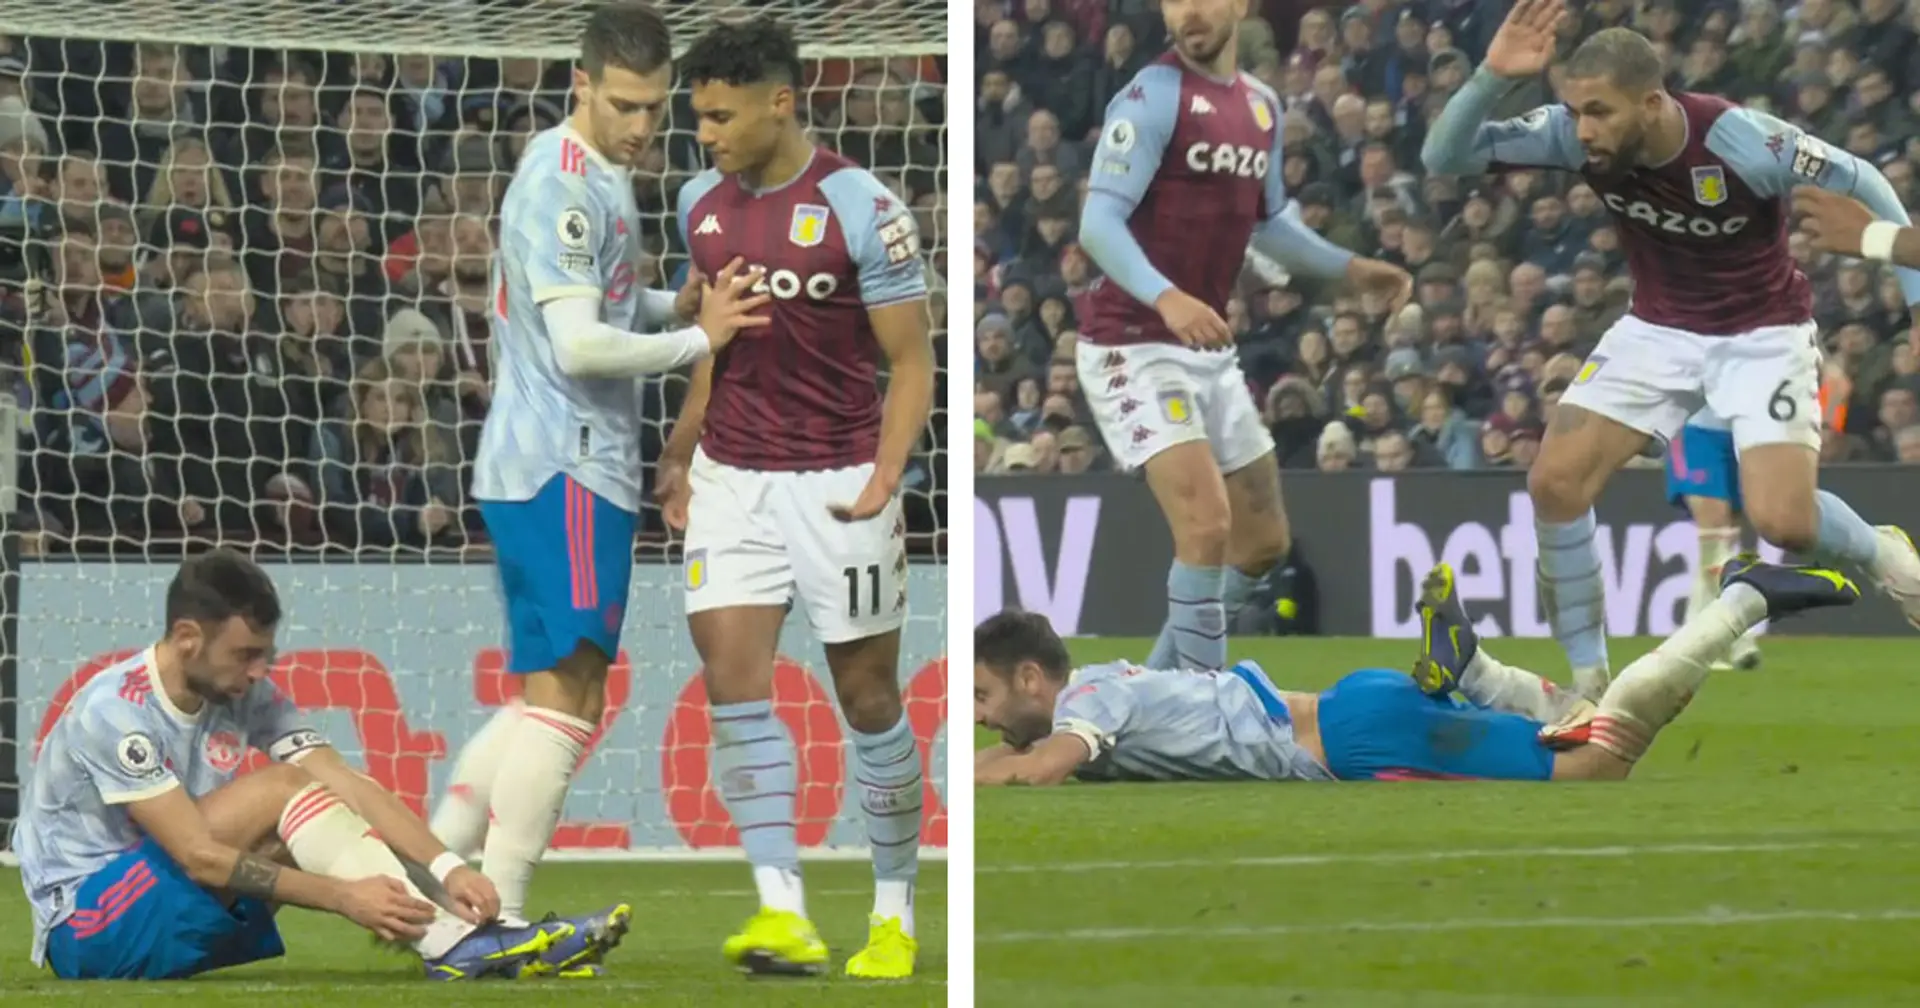 Douglas Luiz's ugly stamp on Bruno & more: 8 episodes you might've missed in Aston Villa draw